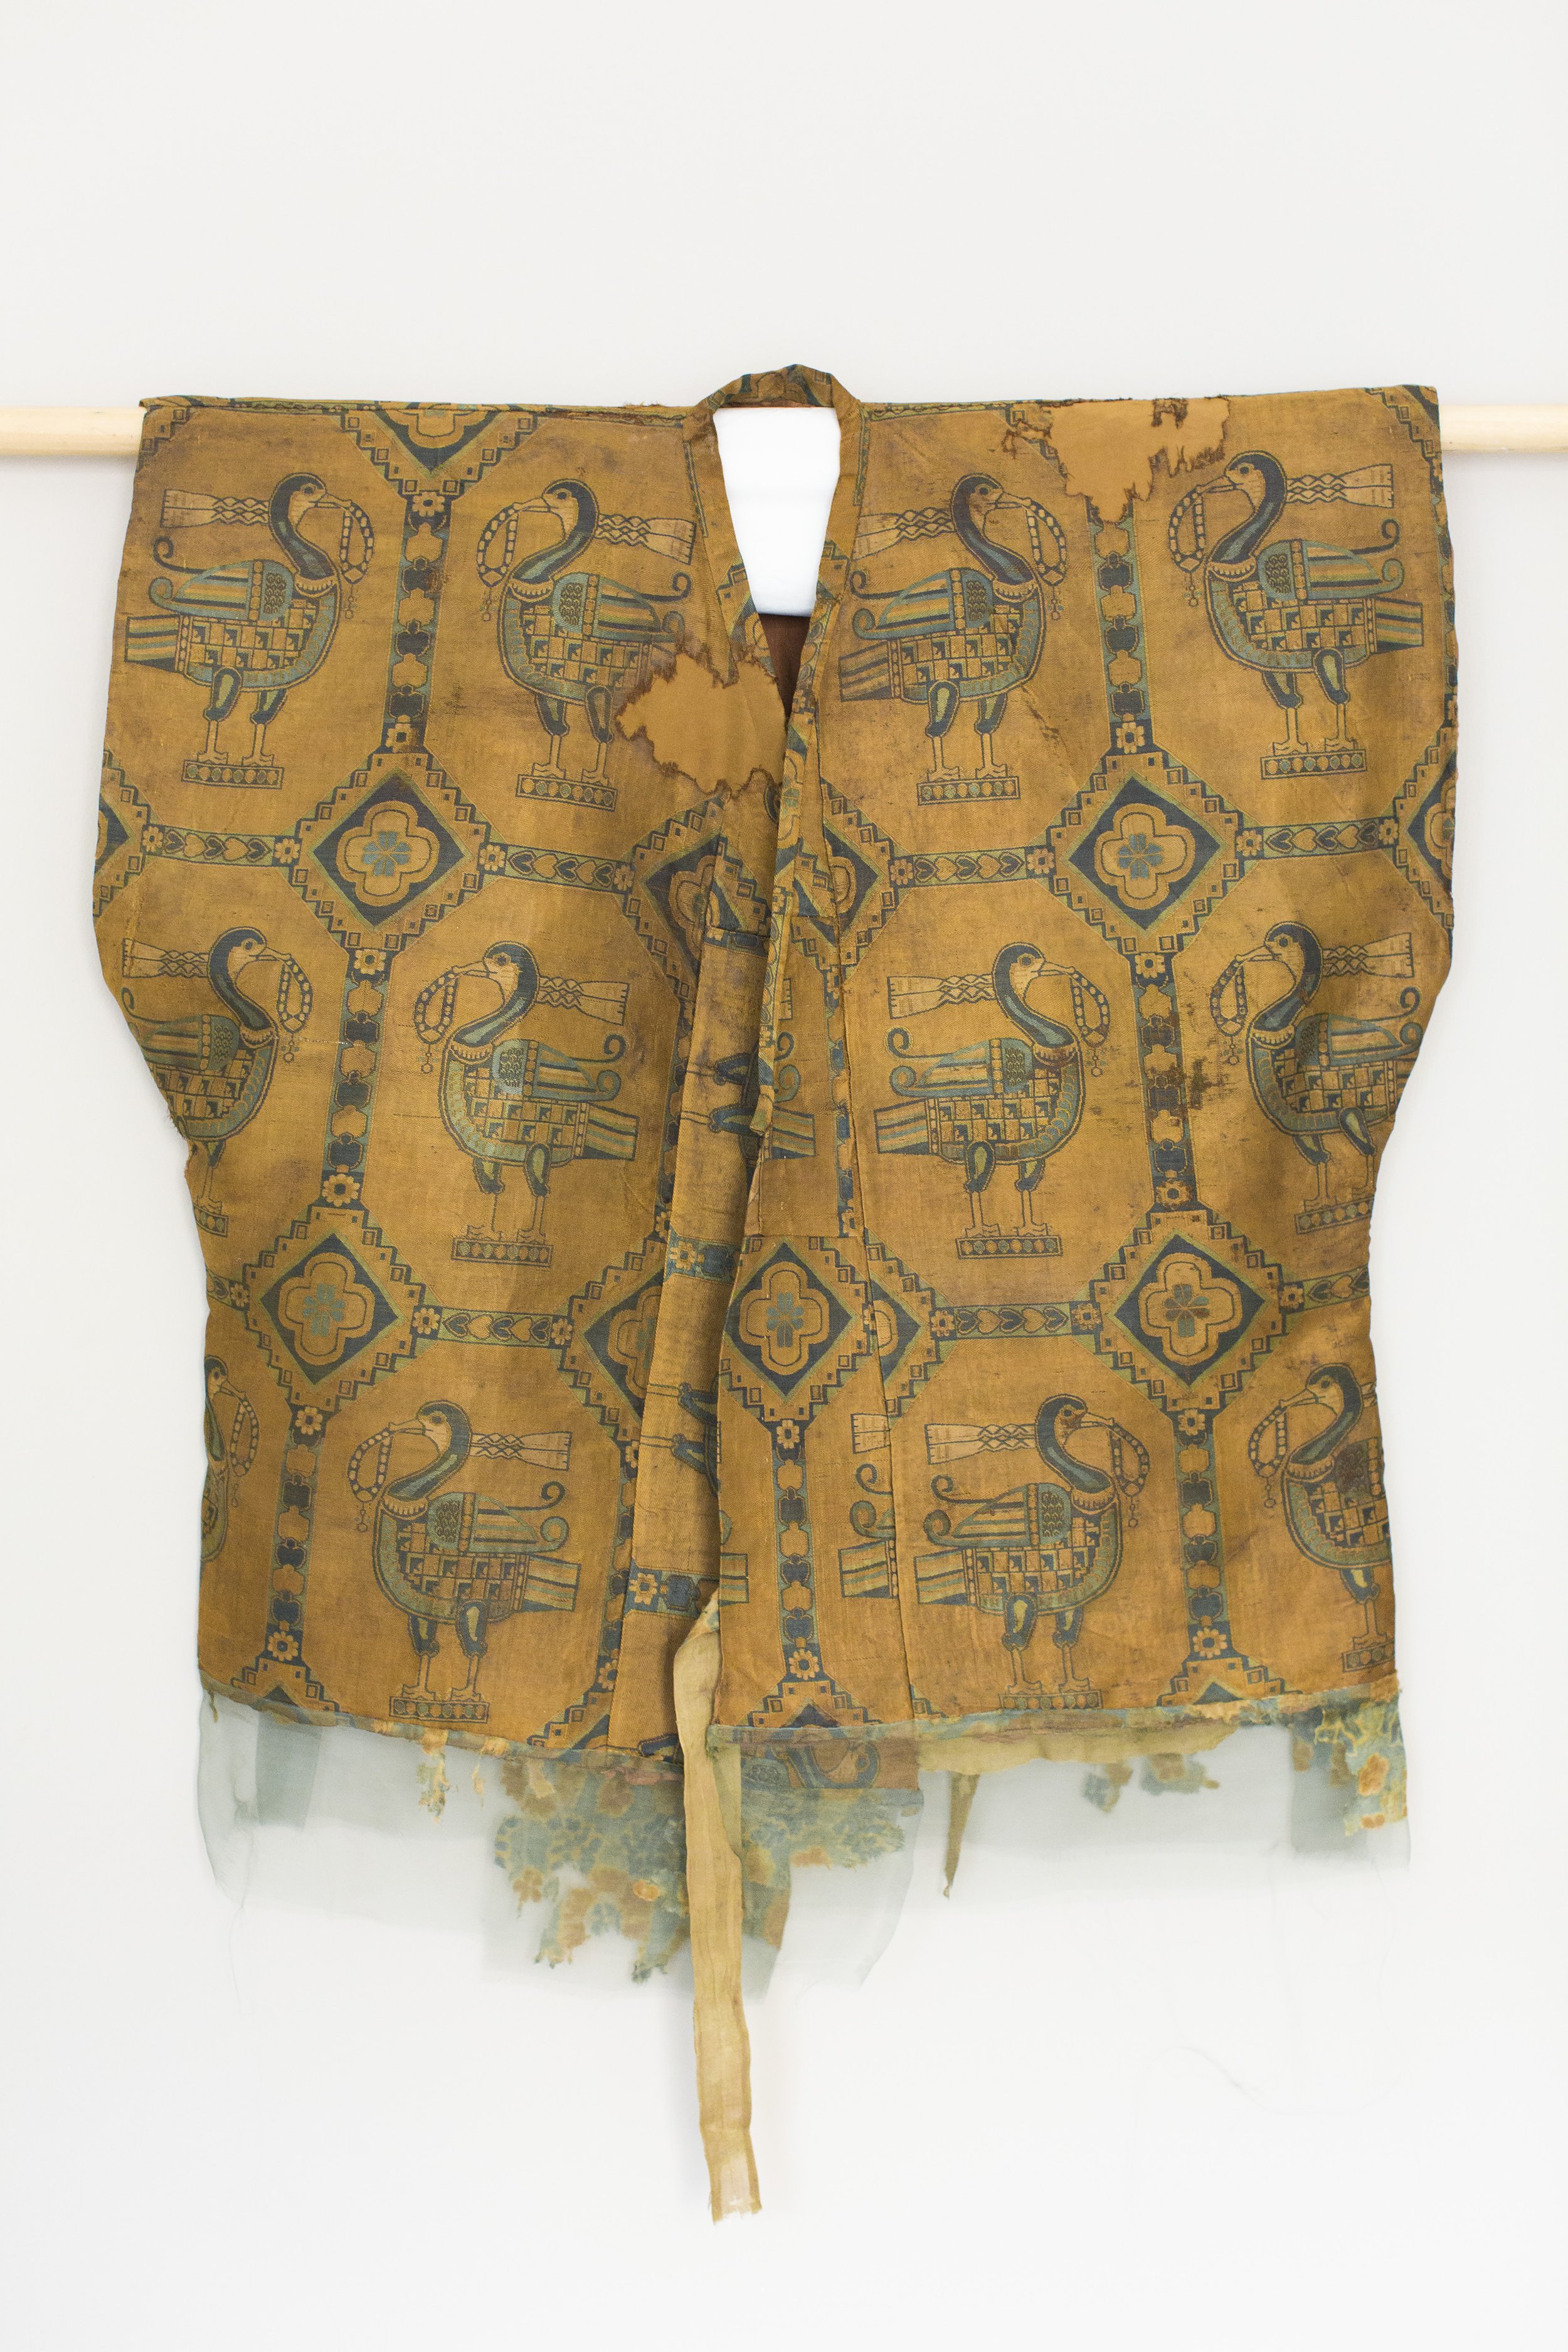   A 1,000-year-old, one-of-a-kind golden silk samite shirt, which was decorated with ducks wearing scarves and holding pearl necklaces in their beaks.  